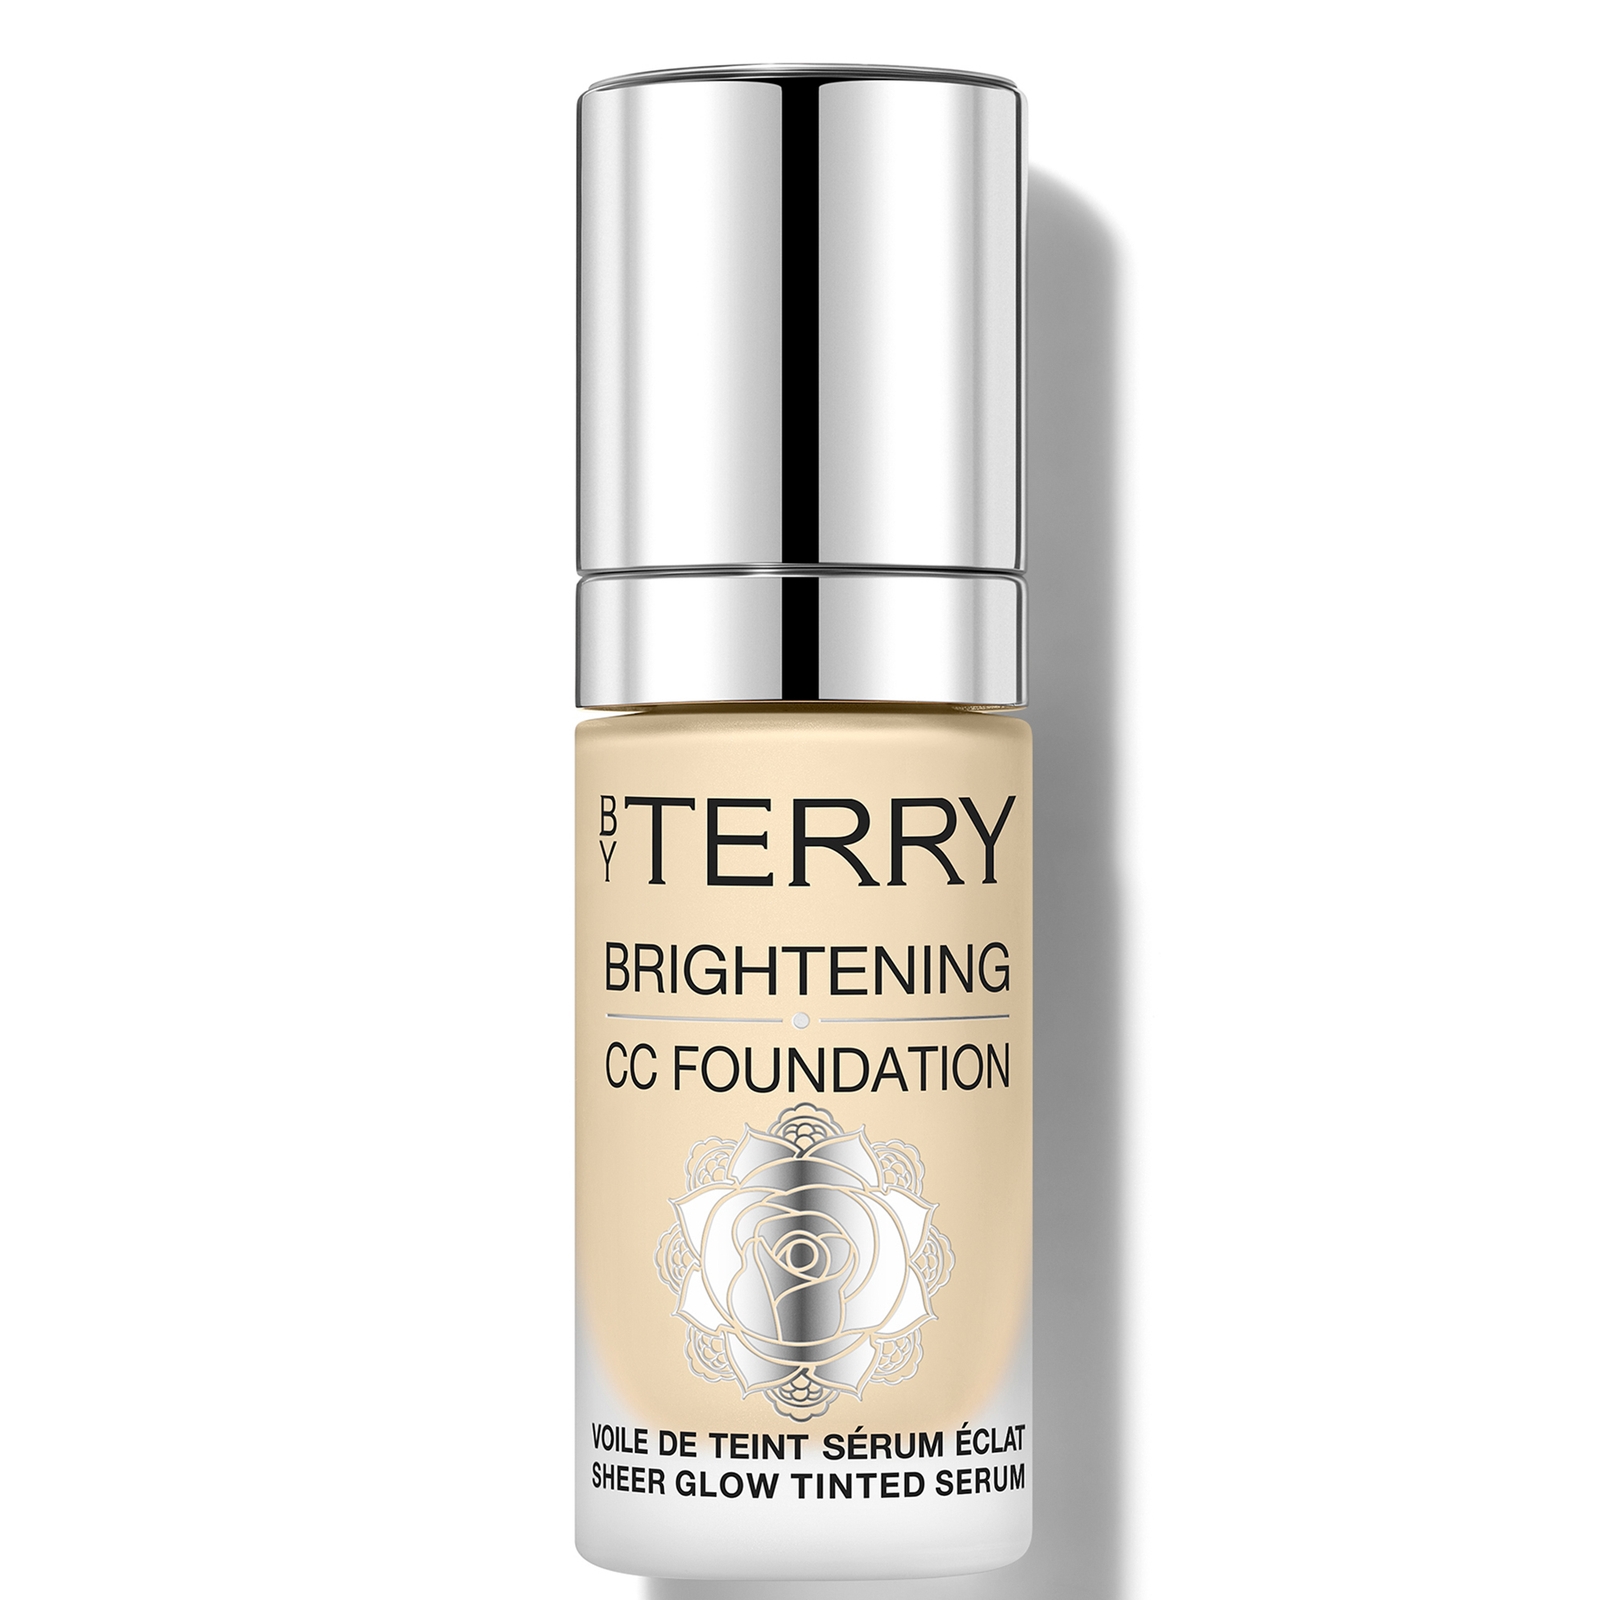 Image of By Terry Brightening CC Foundation 30ml (Various Shades) - 1W - FAIR WARM